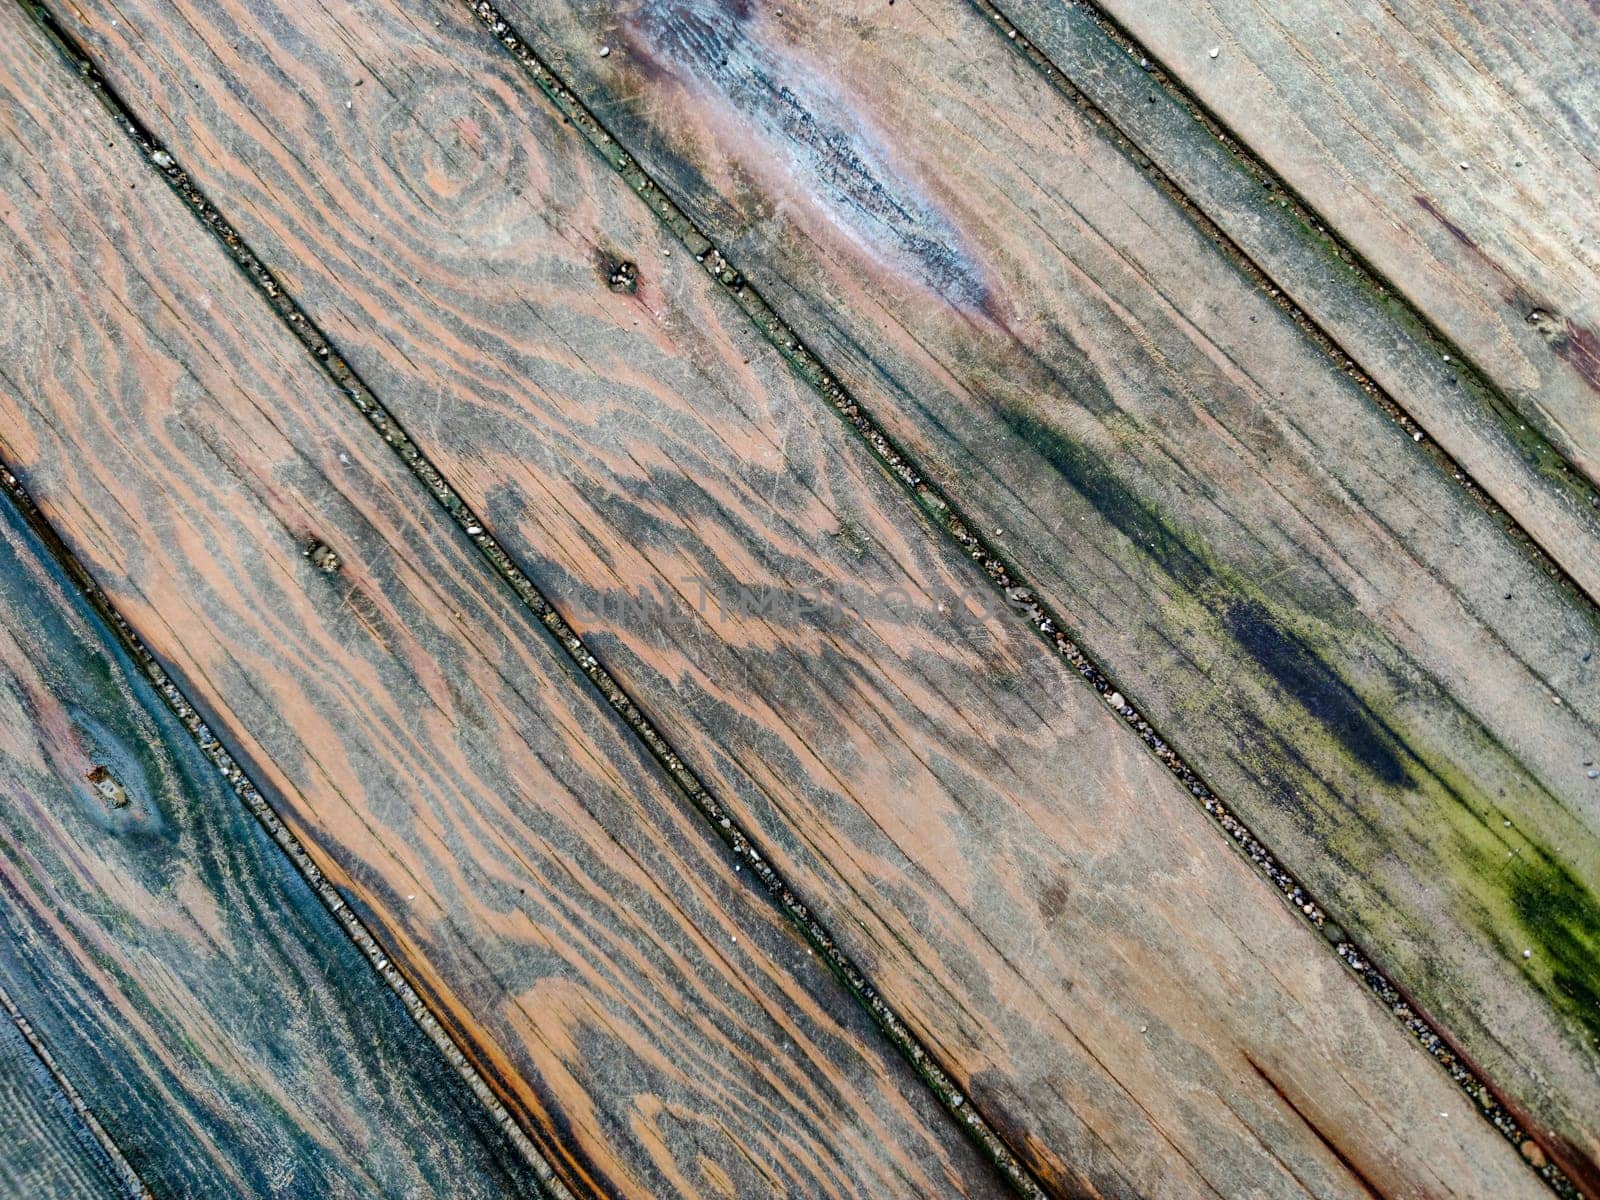 Surface of wooden boards with multicolored spots from dampness, diagonal lines, top view.